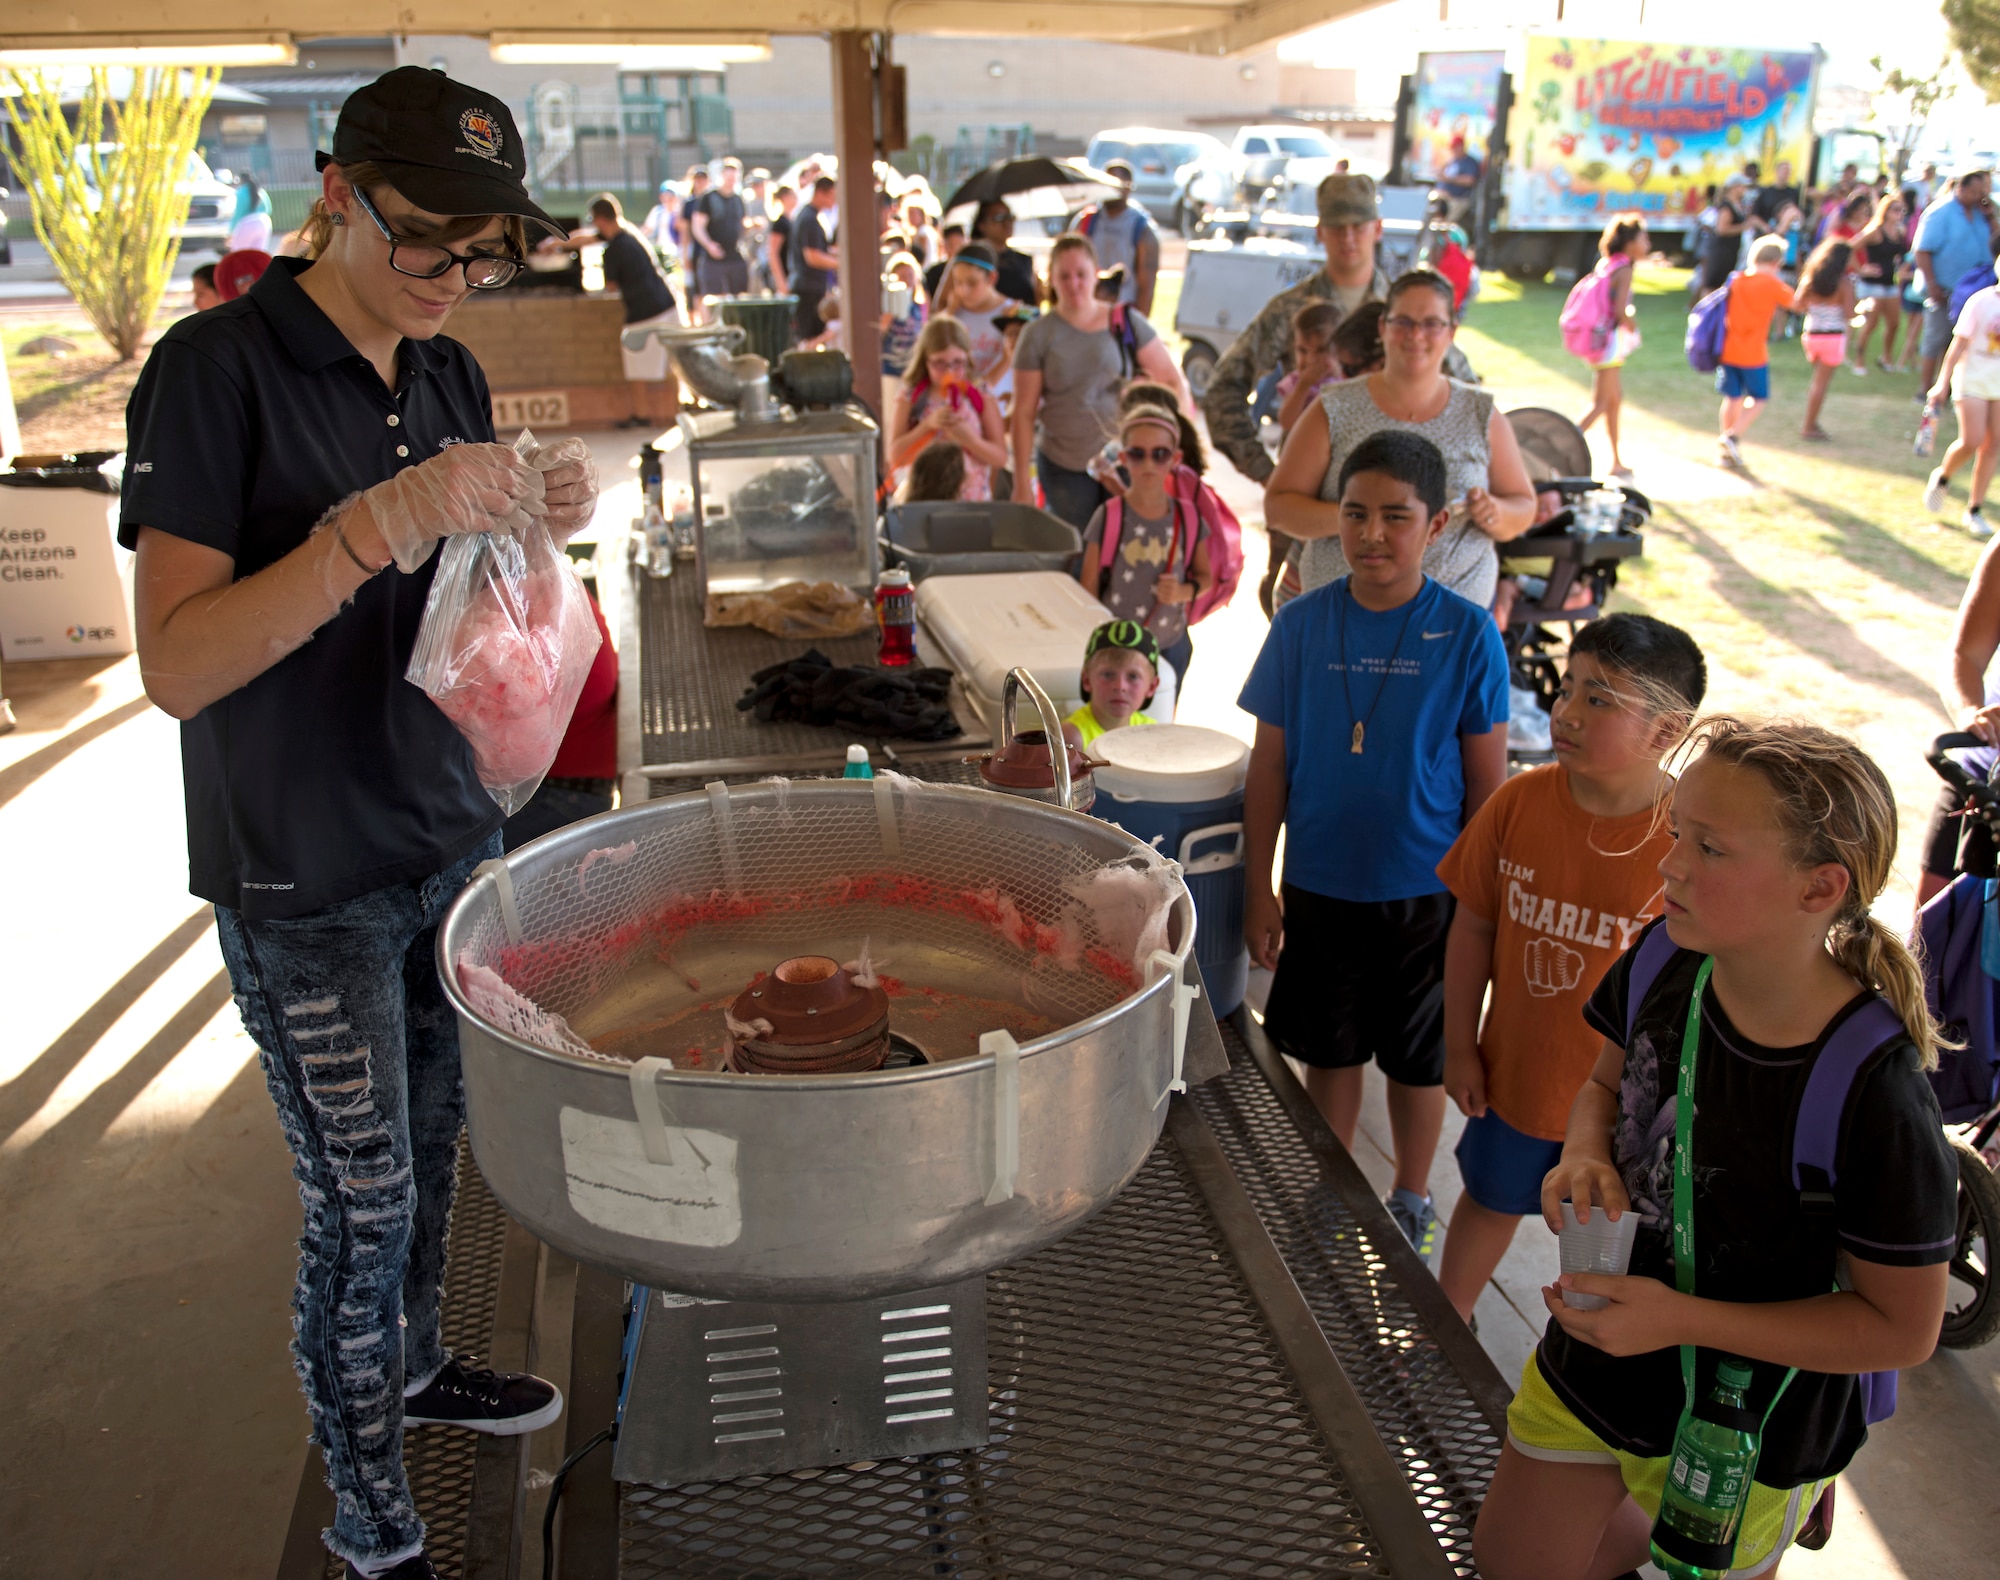 Children and families line up to get free cotton candy during the Back-To-School Bash July 25, 2018, at Luke Air Force Base, Ariz. The Bash included free food and drinks for all attendees. (U.S. Air Force photo by Senior Airman Ridge Shan)